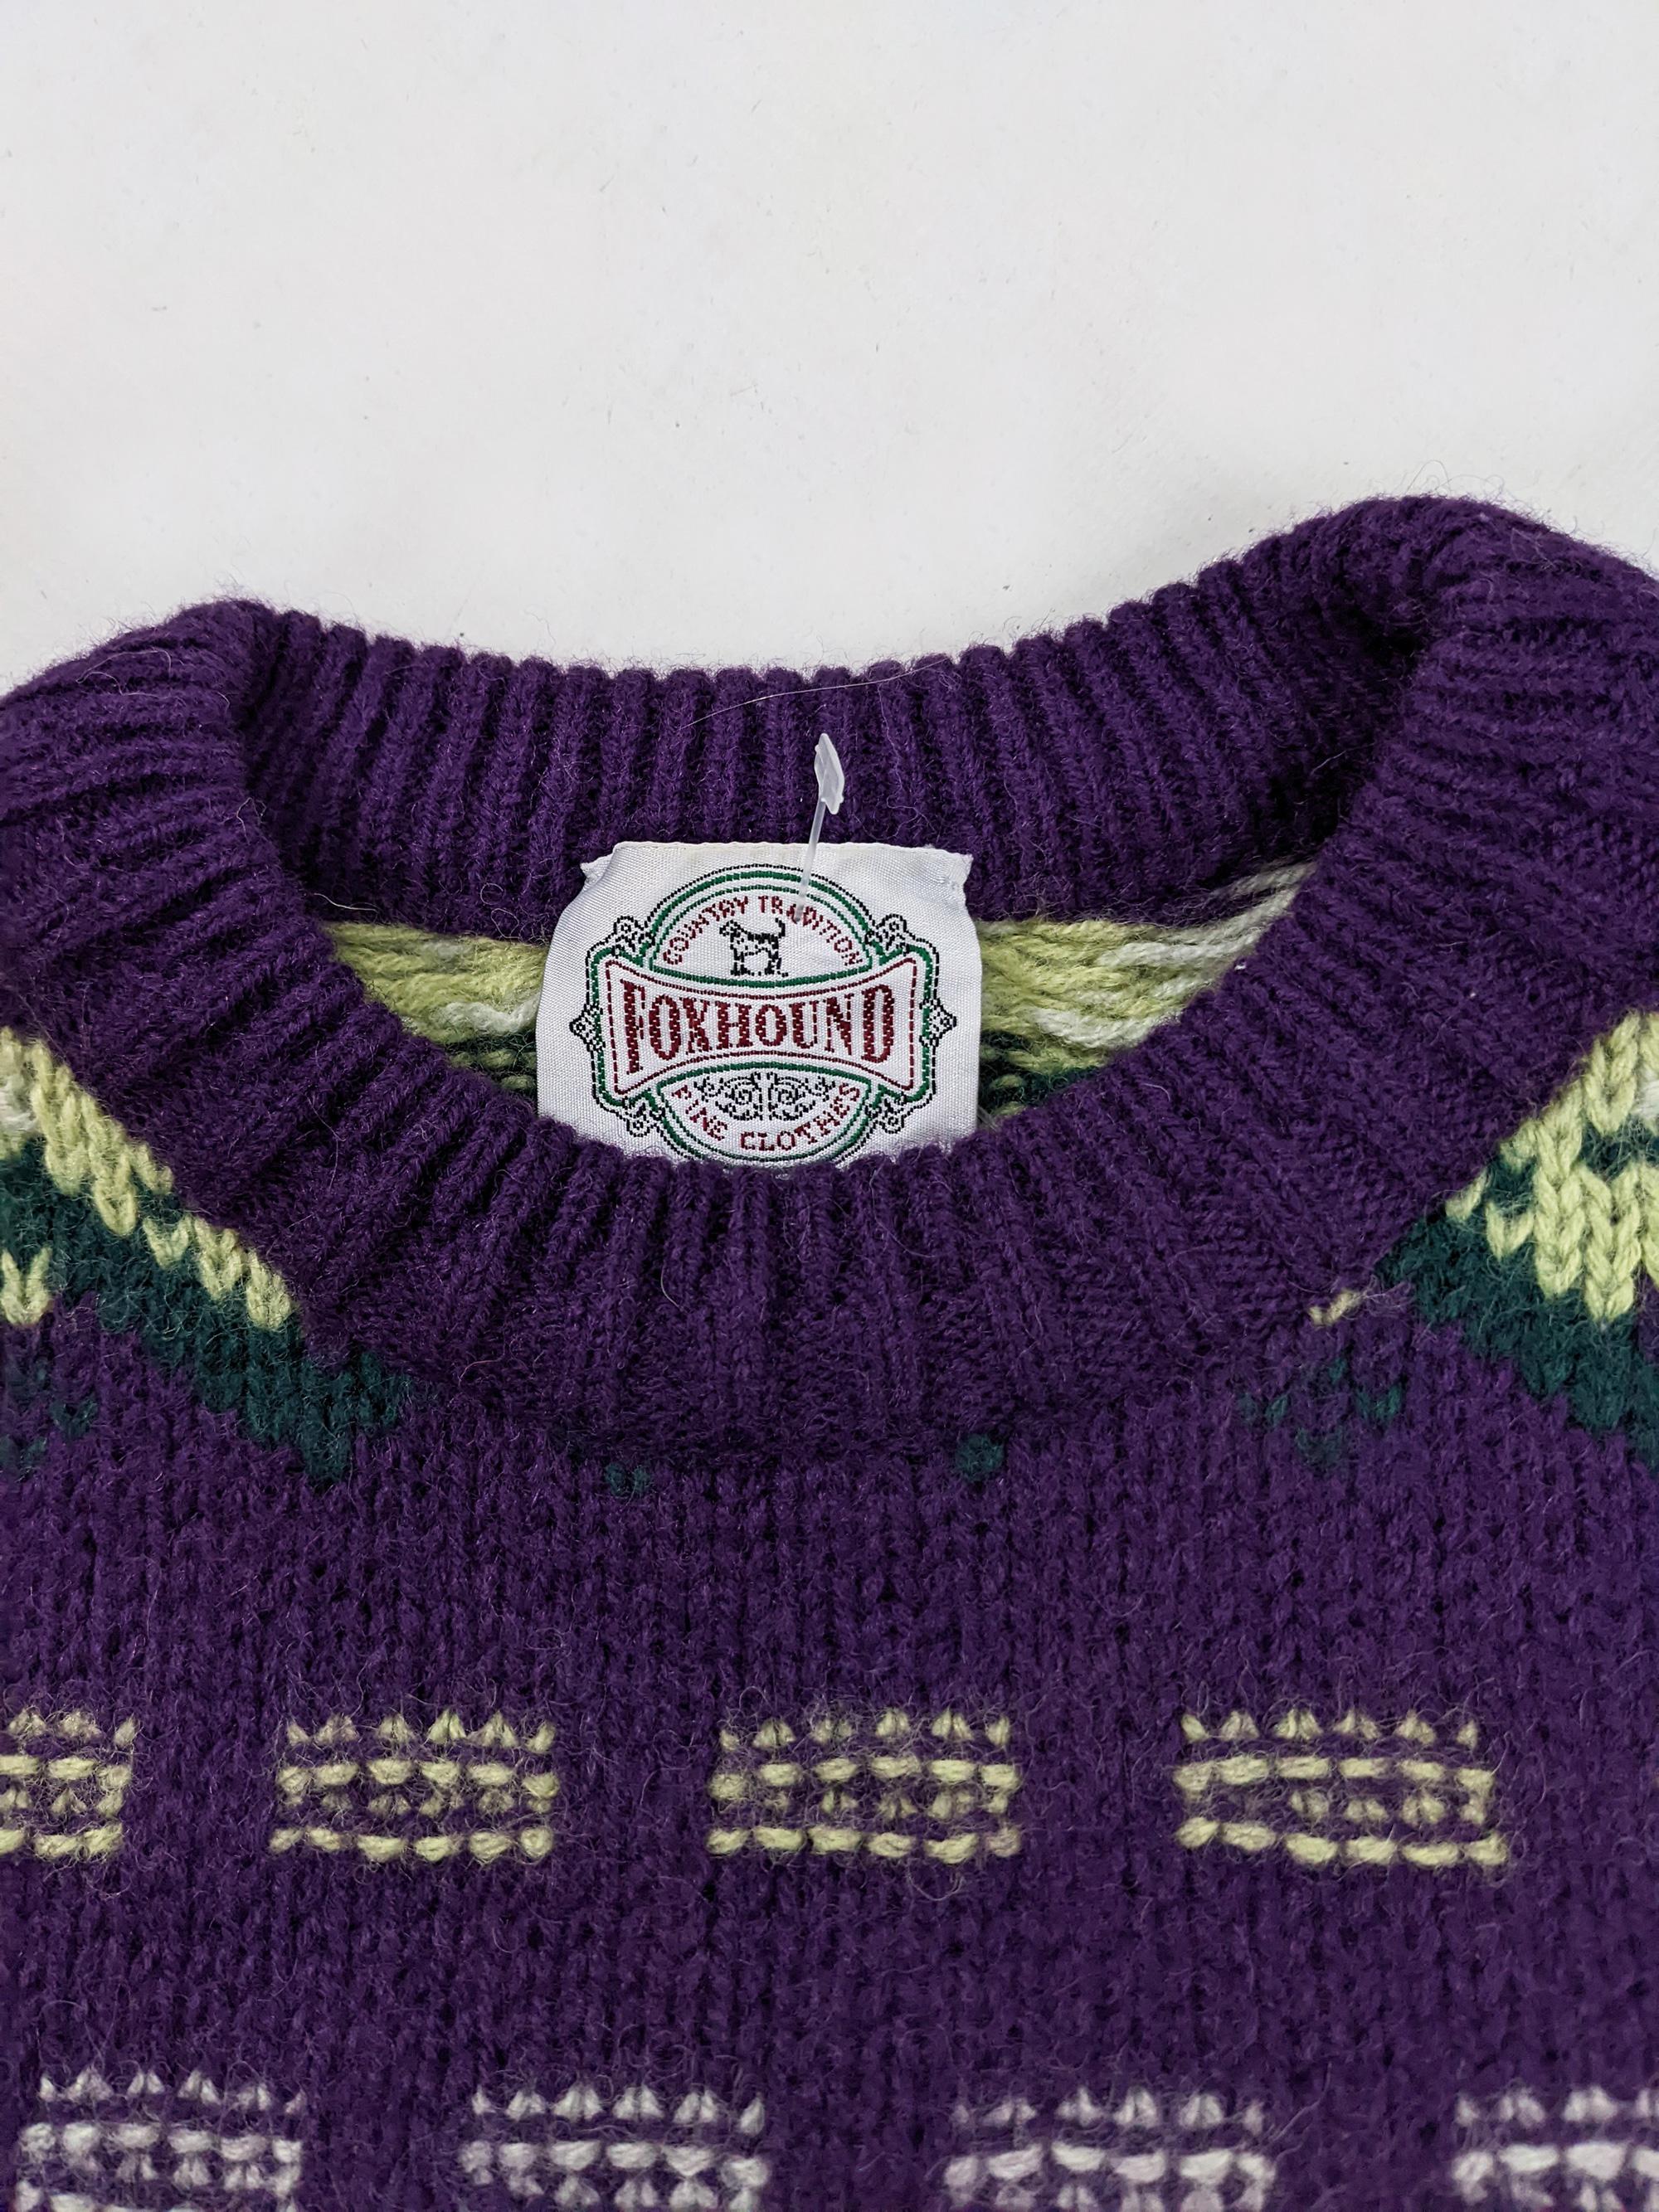 Foxhound Vintage Mens 1980s Italian Purple Knit Sweater For Sale 3